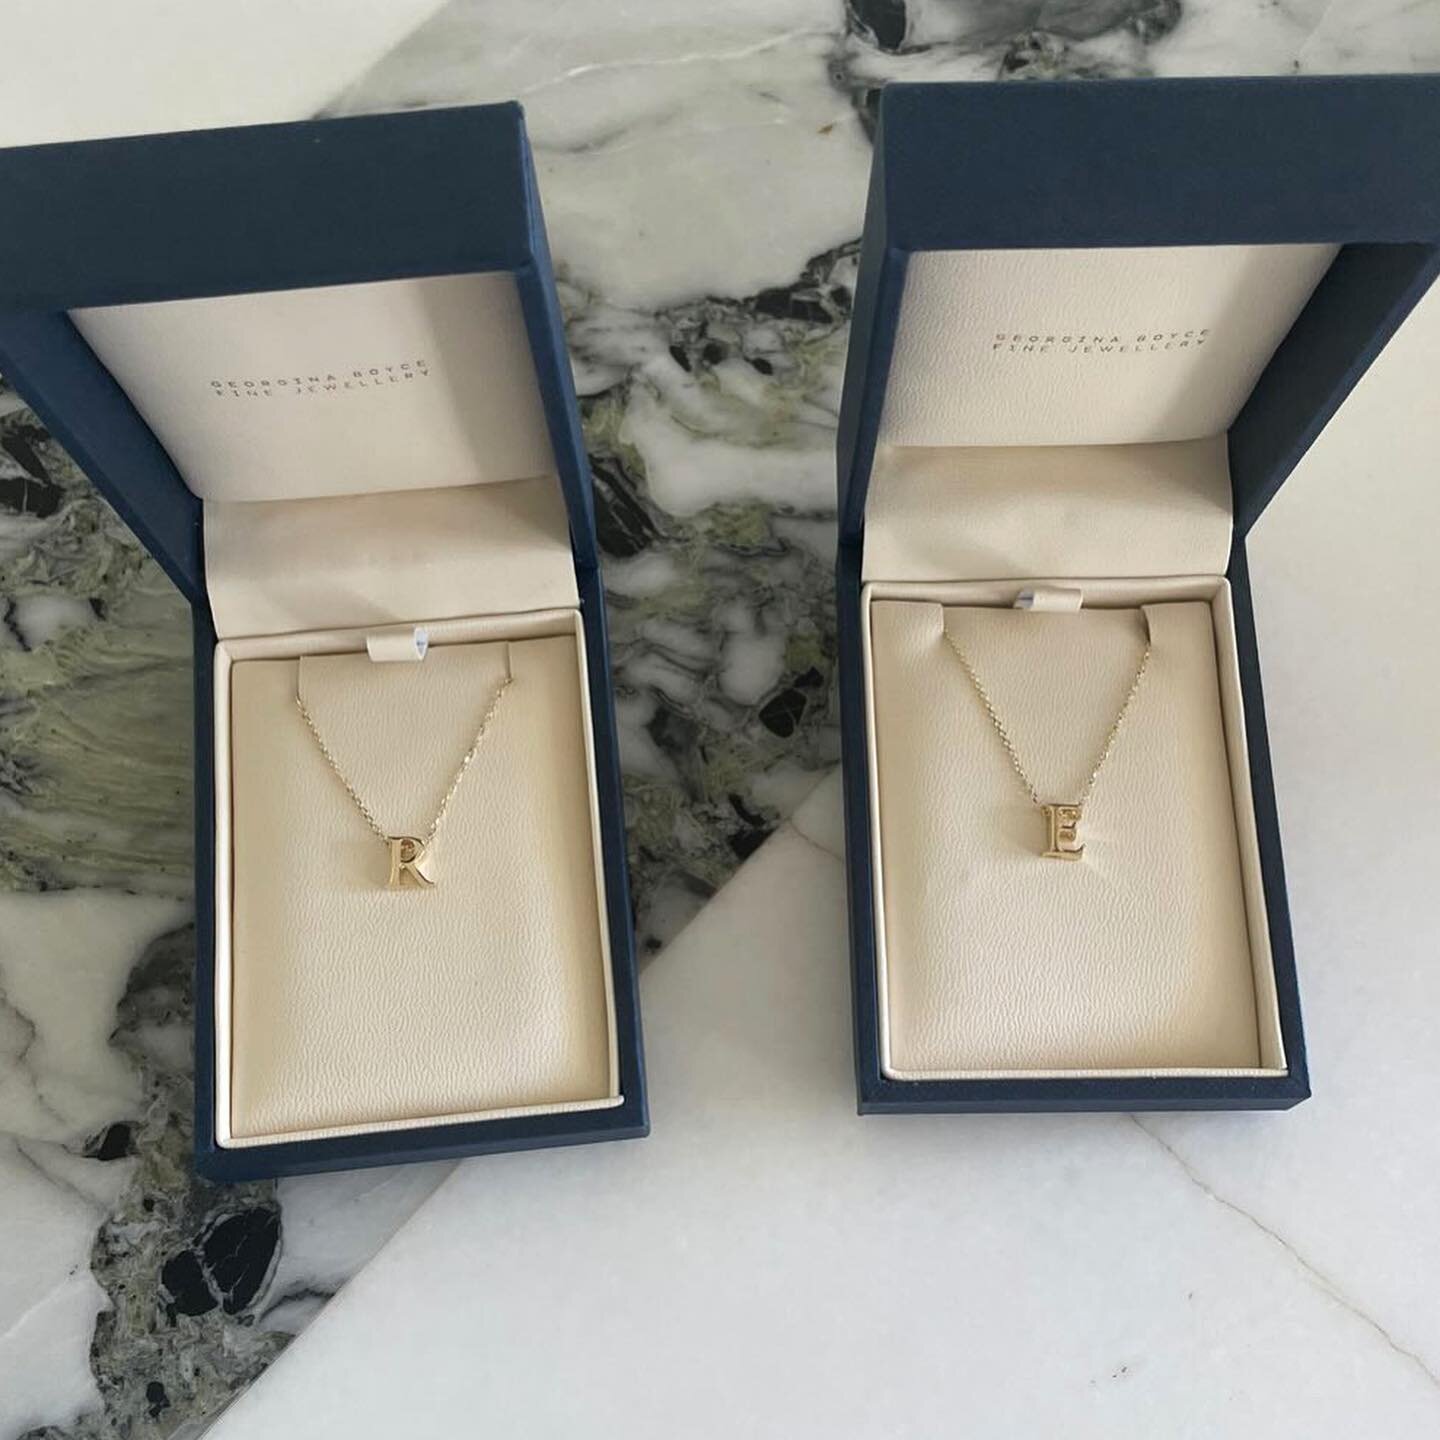 A pair of yellow gold initial necklaces off to their new home.  These have been so popular.  Super easy to wear, totally wearable and yummy polished yellow gold. Simple and sweet. Xx #gifting #jewellery #personalisedjewellery #finejewellery #goldneck